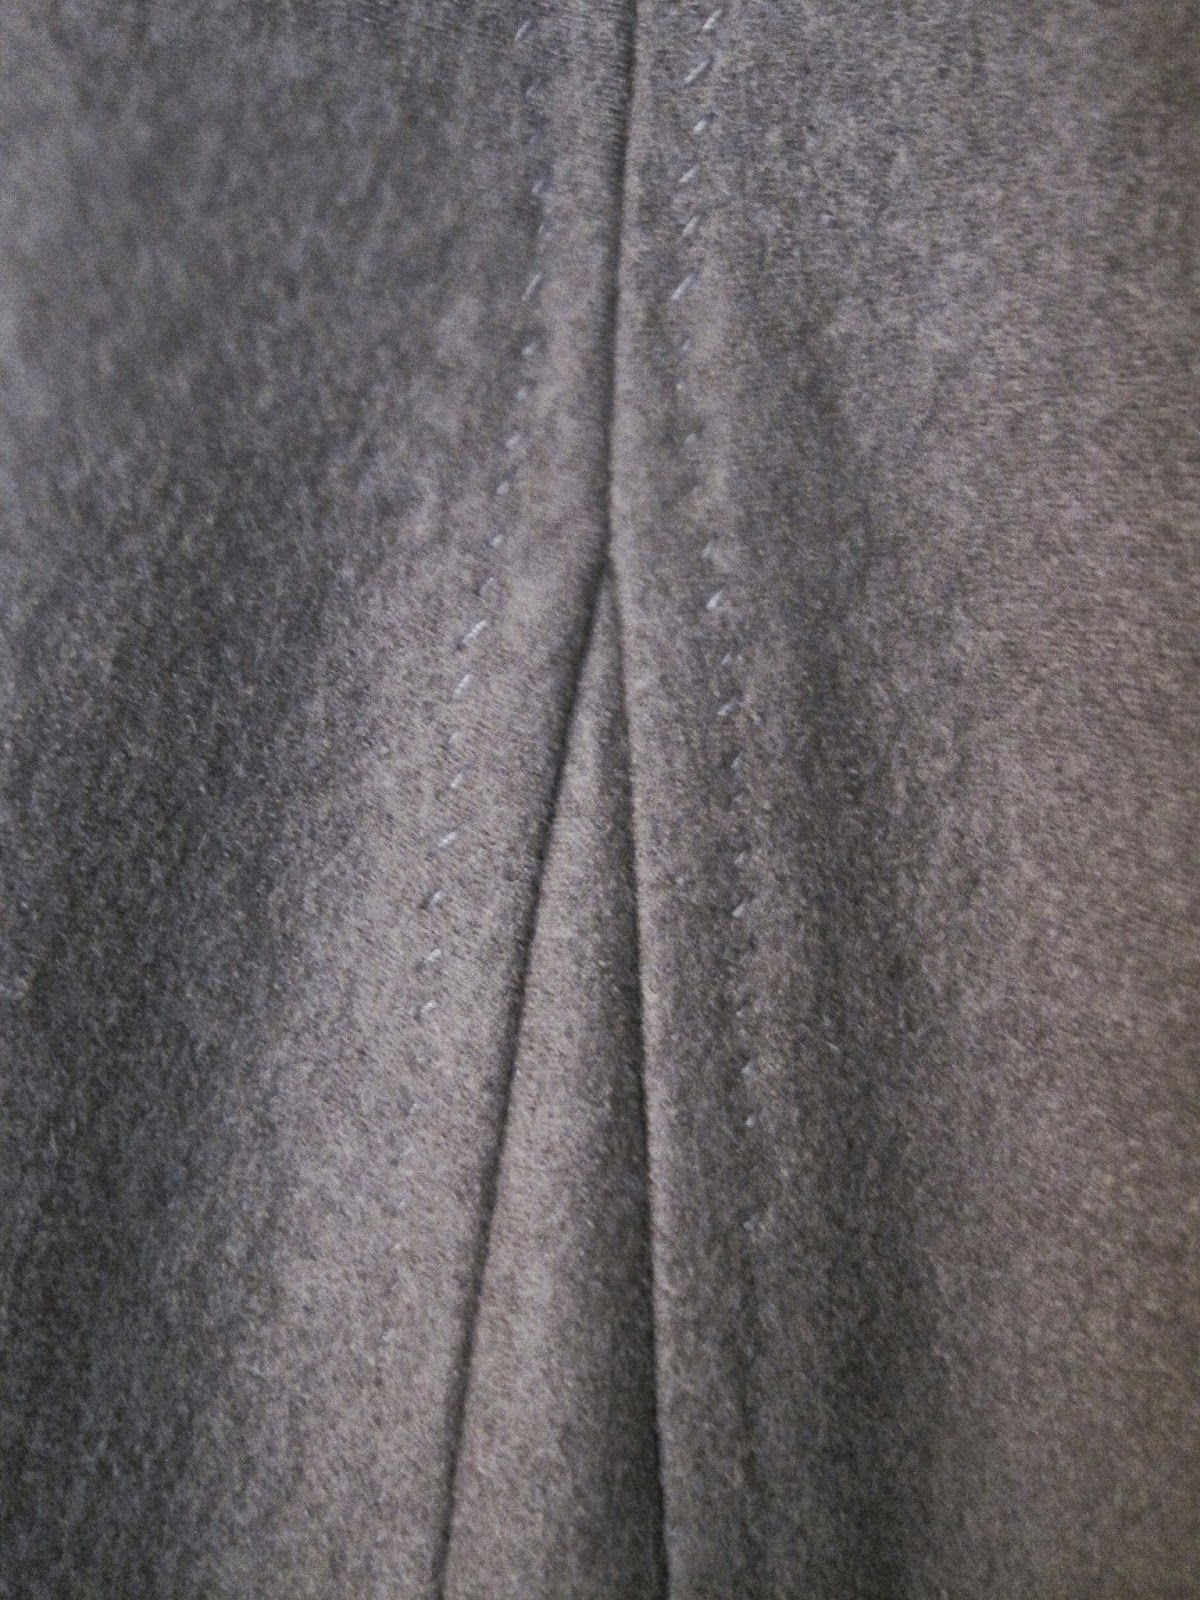 Stone Tracery Threads: Finishing Gores and Hiding Knots - Gray Apron Dress